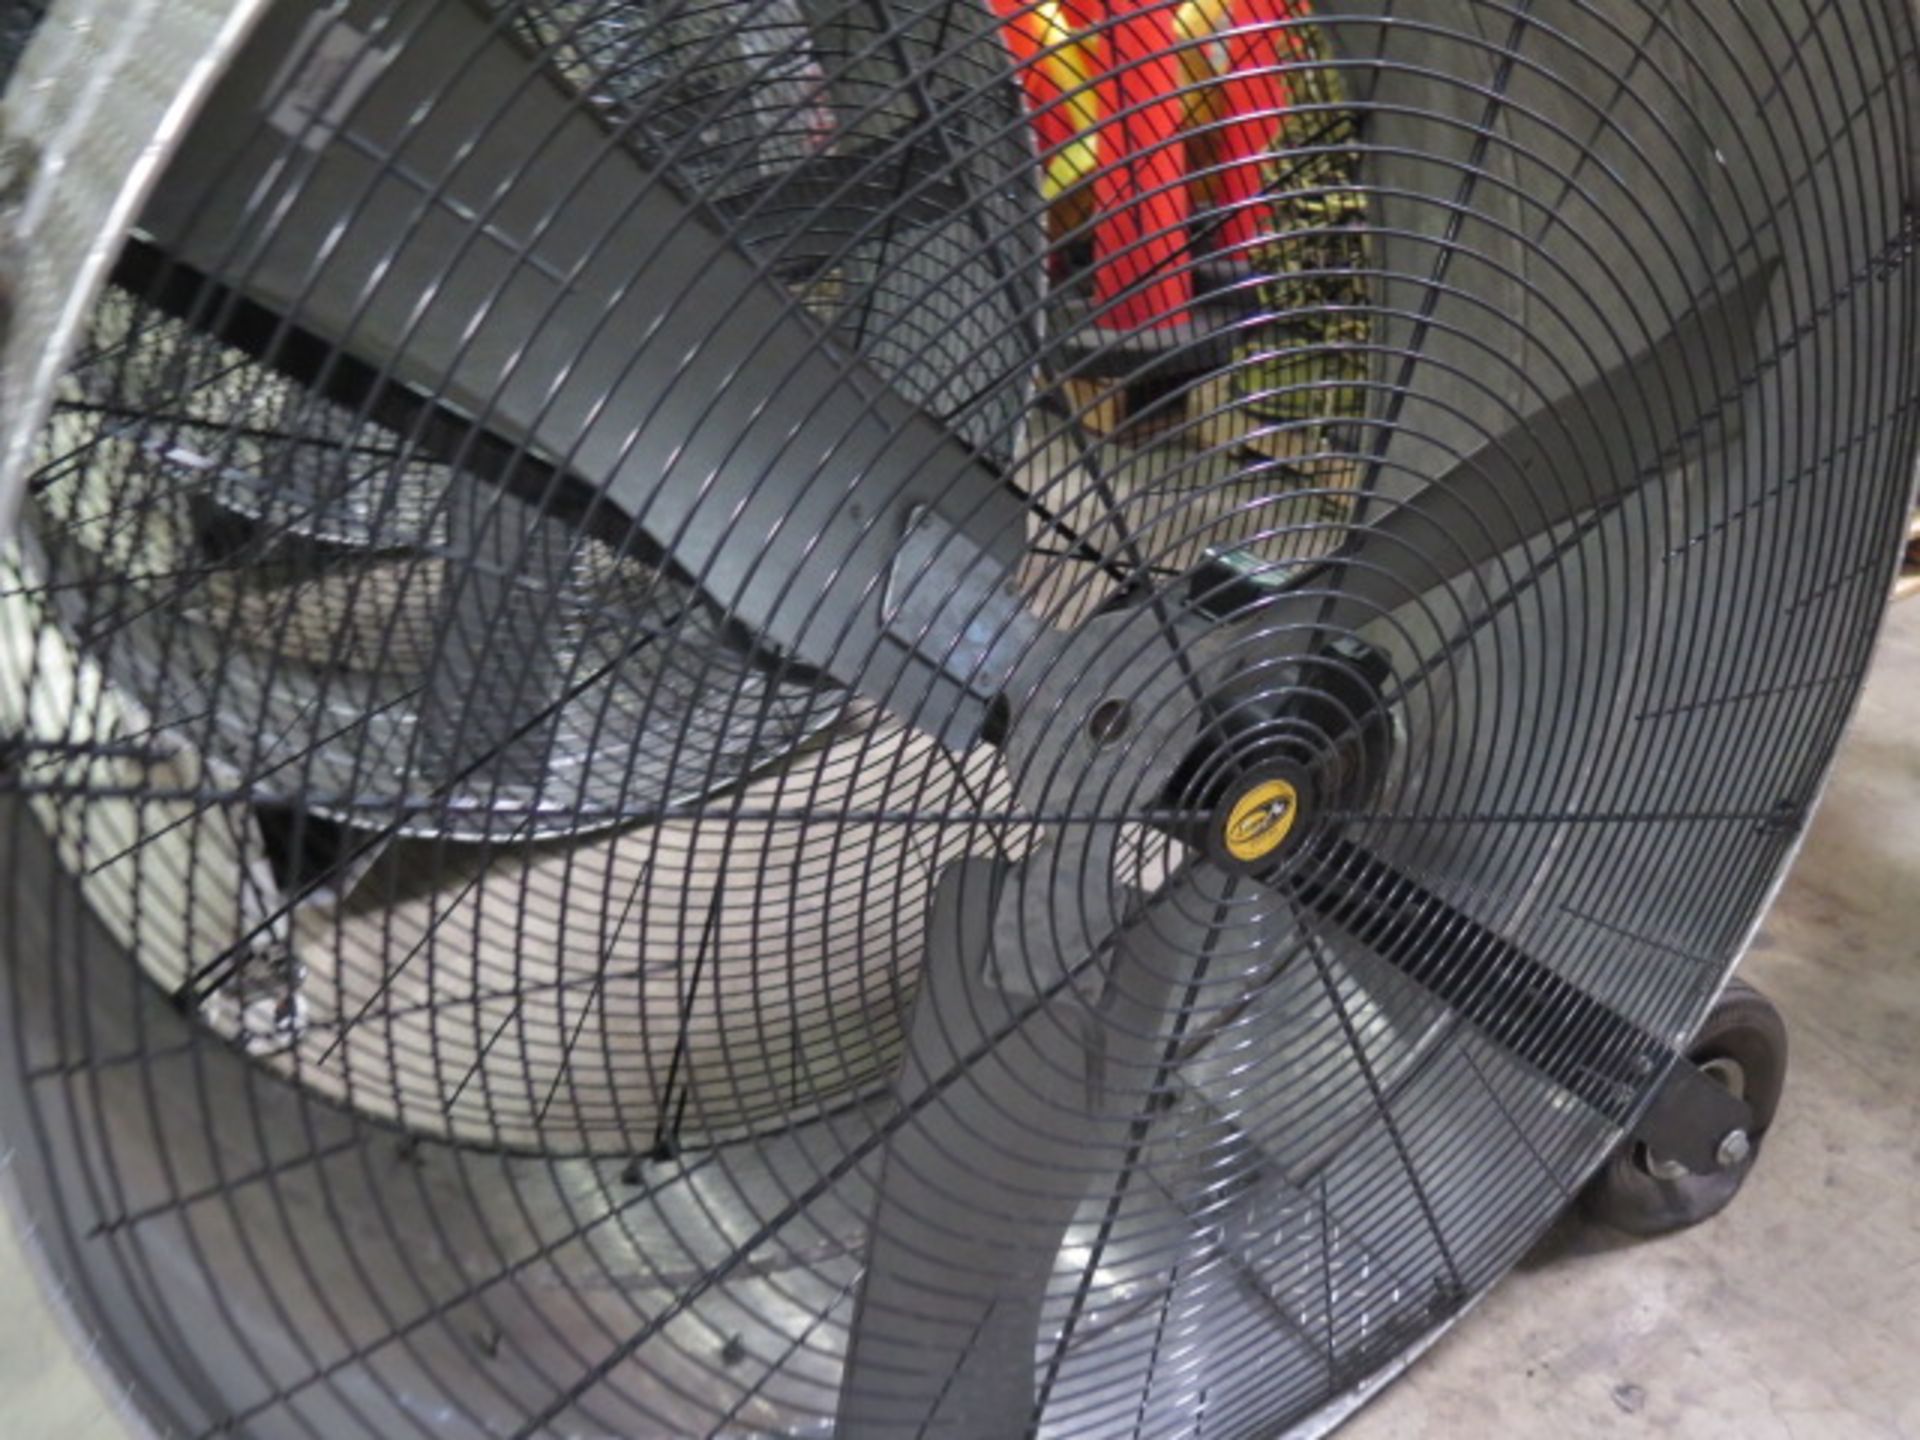 Shop Fan, SOLD AS IS WITH NO WARRANTY - Image 2 of 4